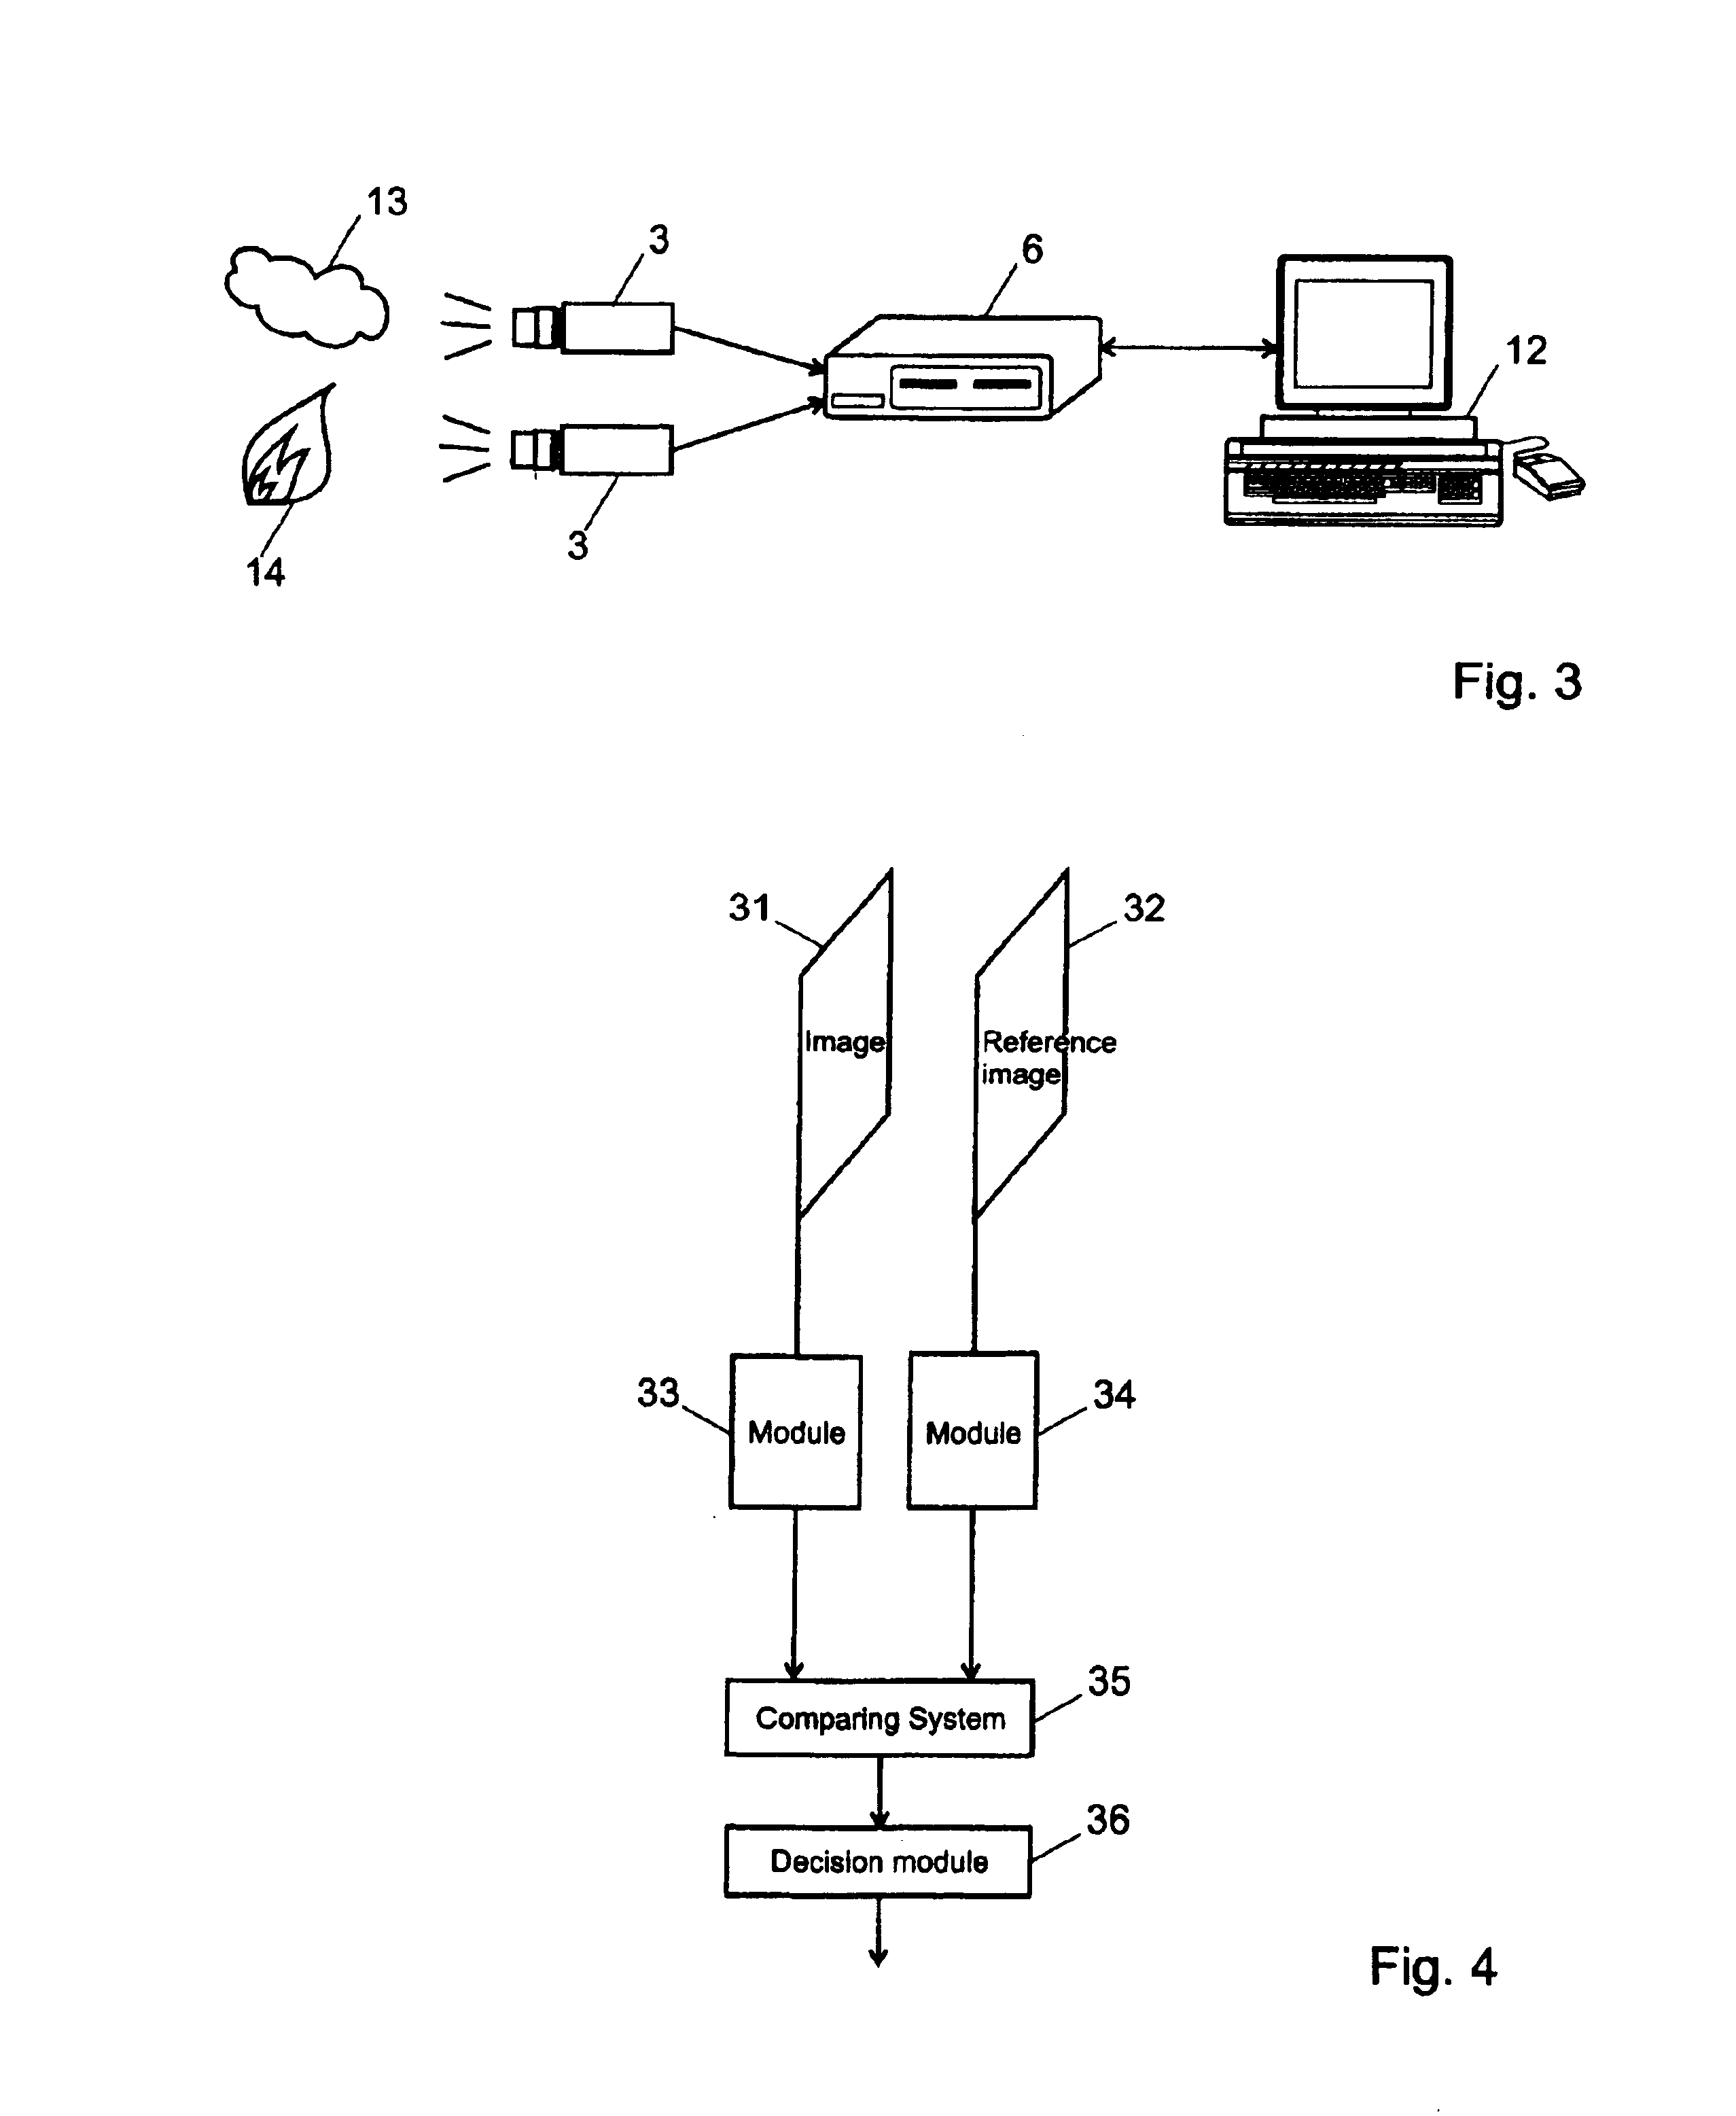 Process and device for detecting fires based on image analysis